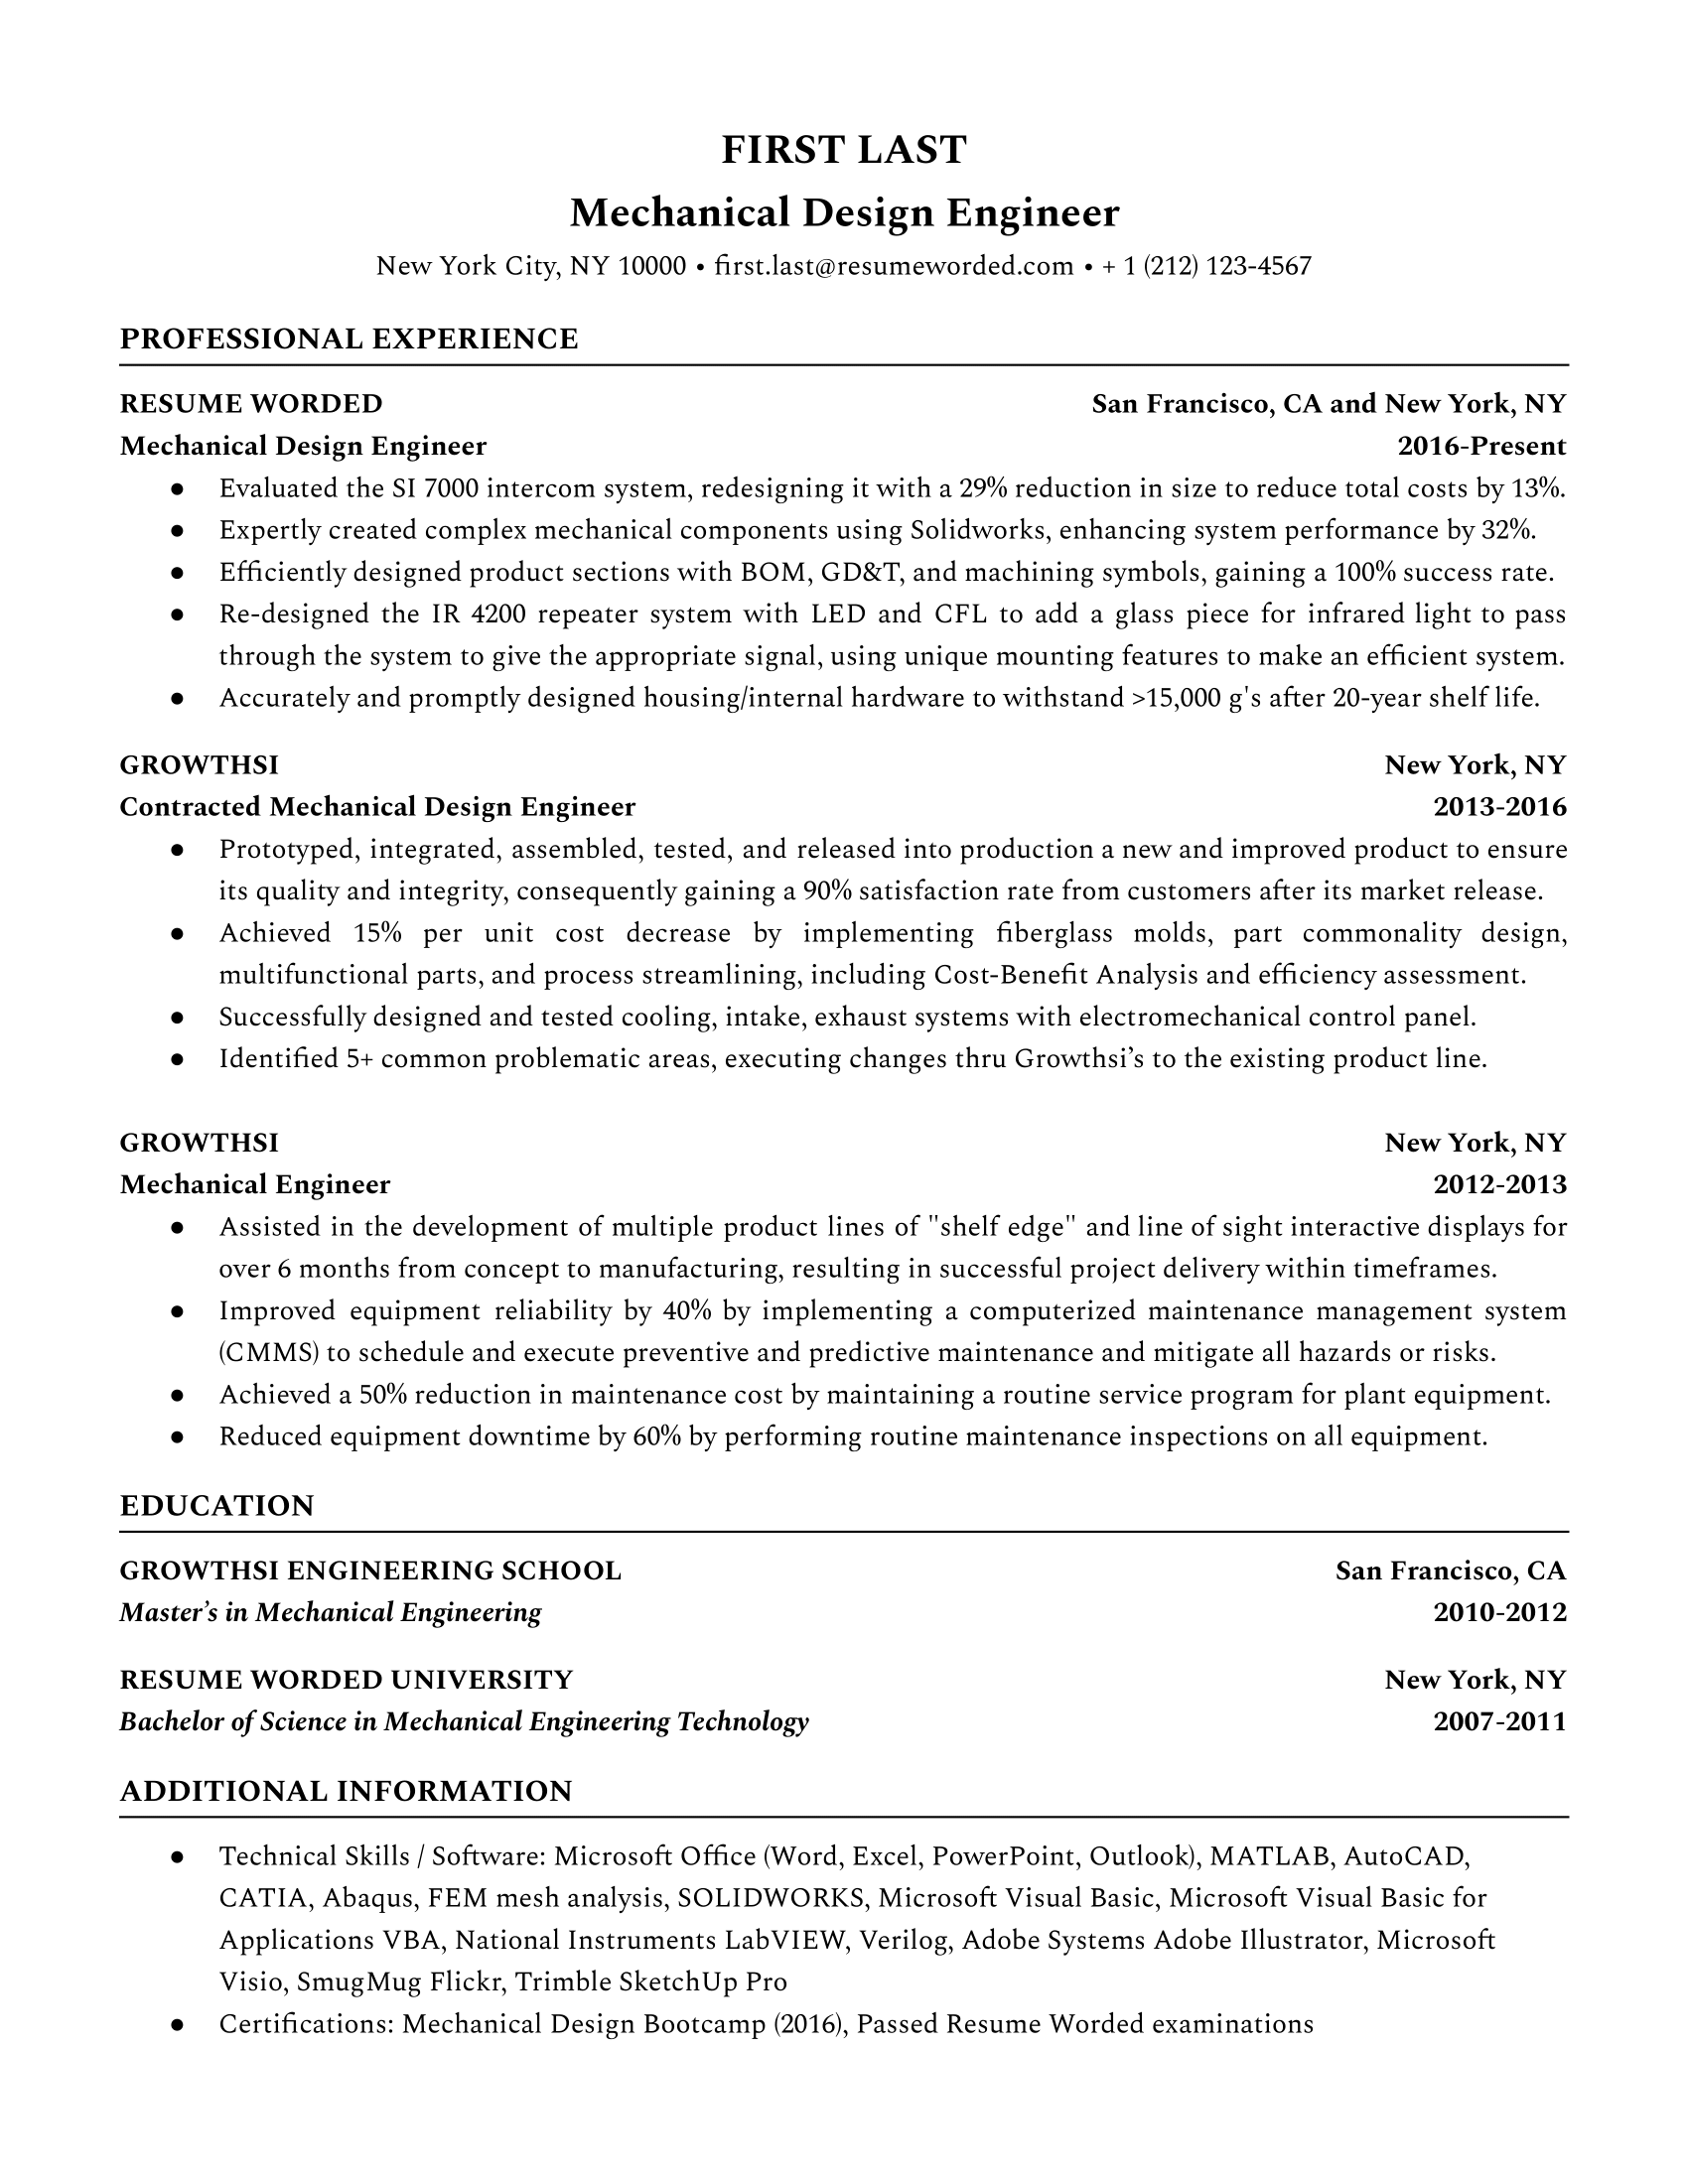 Mechanical design engineer resume with strong action verbs and skills section